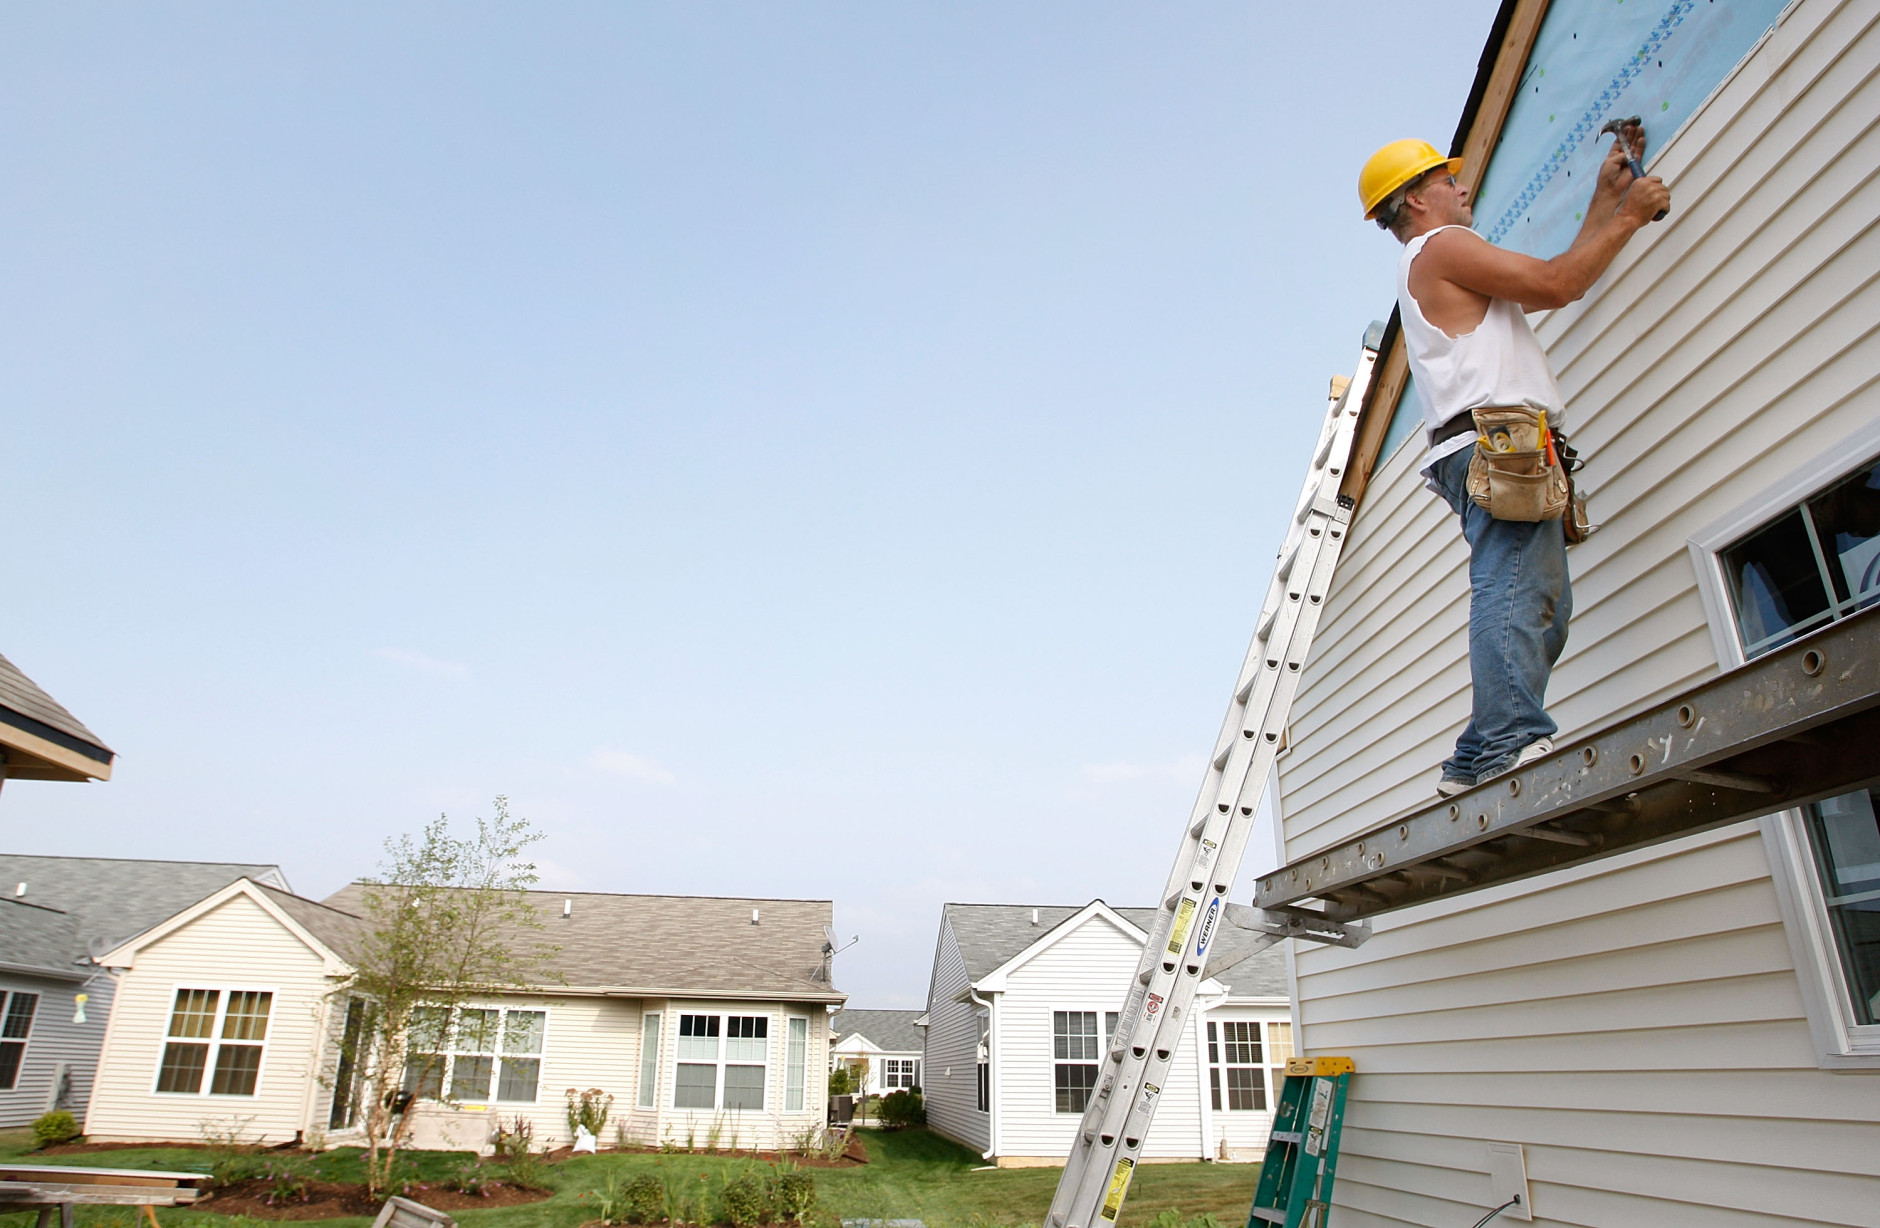 HUNTLEY, IL - AUGUST 19:  John Calendo hangs vinyl siding on a newly-constructed home August 19, 2008 in Huntley, Illinois. According to the U.S. Commerce Department new home construction fell in July with builders breaking ground on 965,000 units, the lowest level in more than 17 years but, still more than the 950,000 units analysts had expected.  (Photo by Scott Olson/Getty Images)